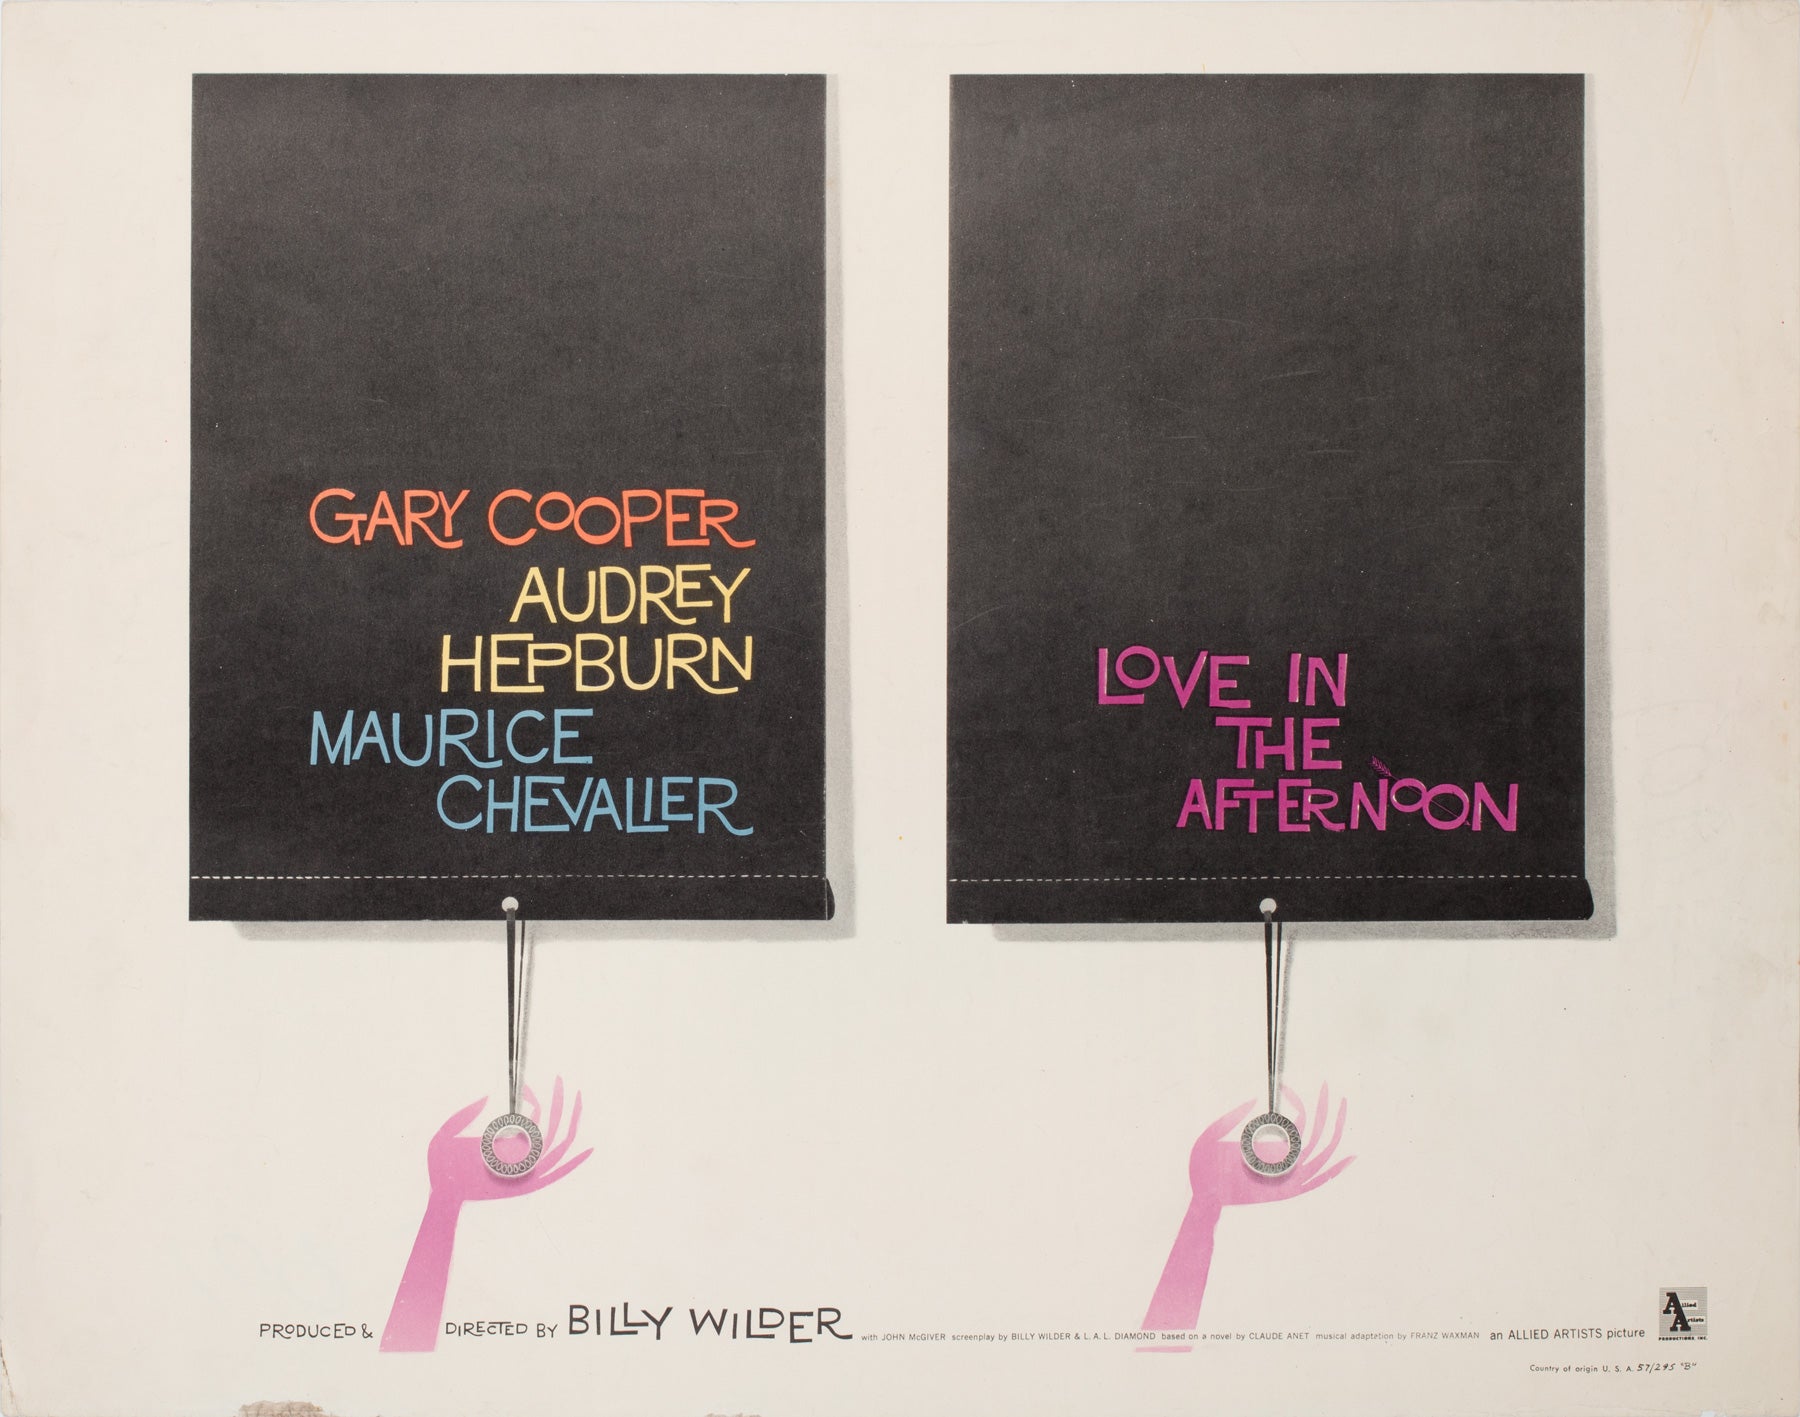 Love in the Afternoon 1957 US 1/2 Sheet Film Movie Poster, Saul Bass